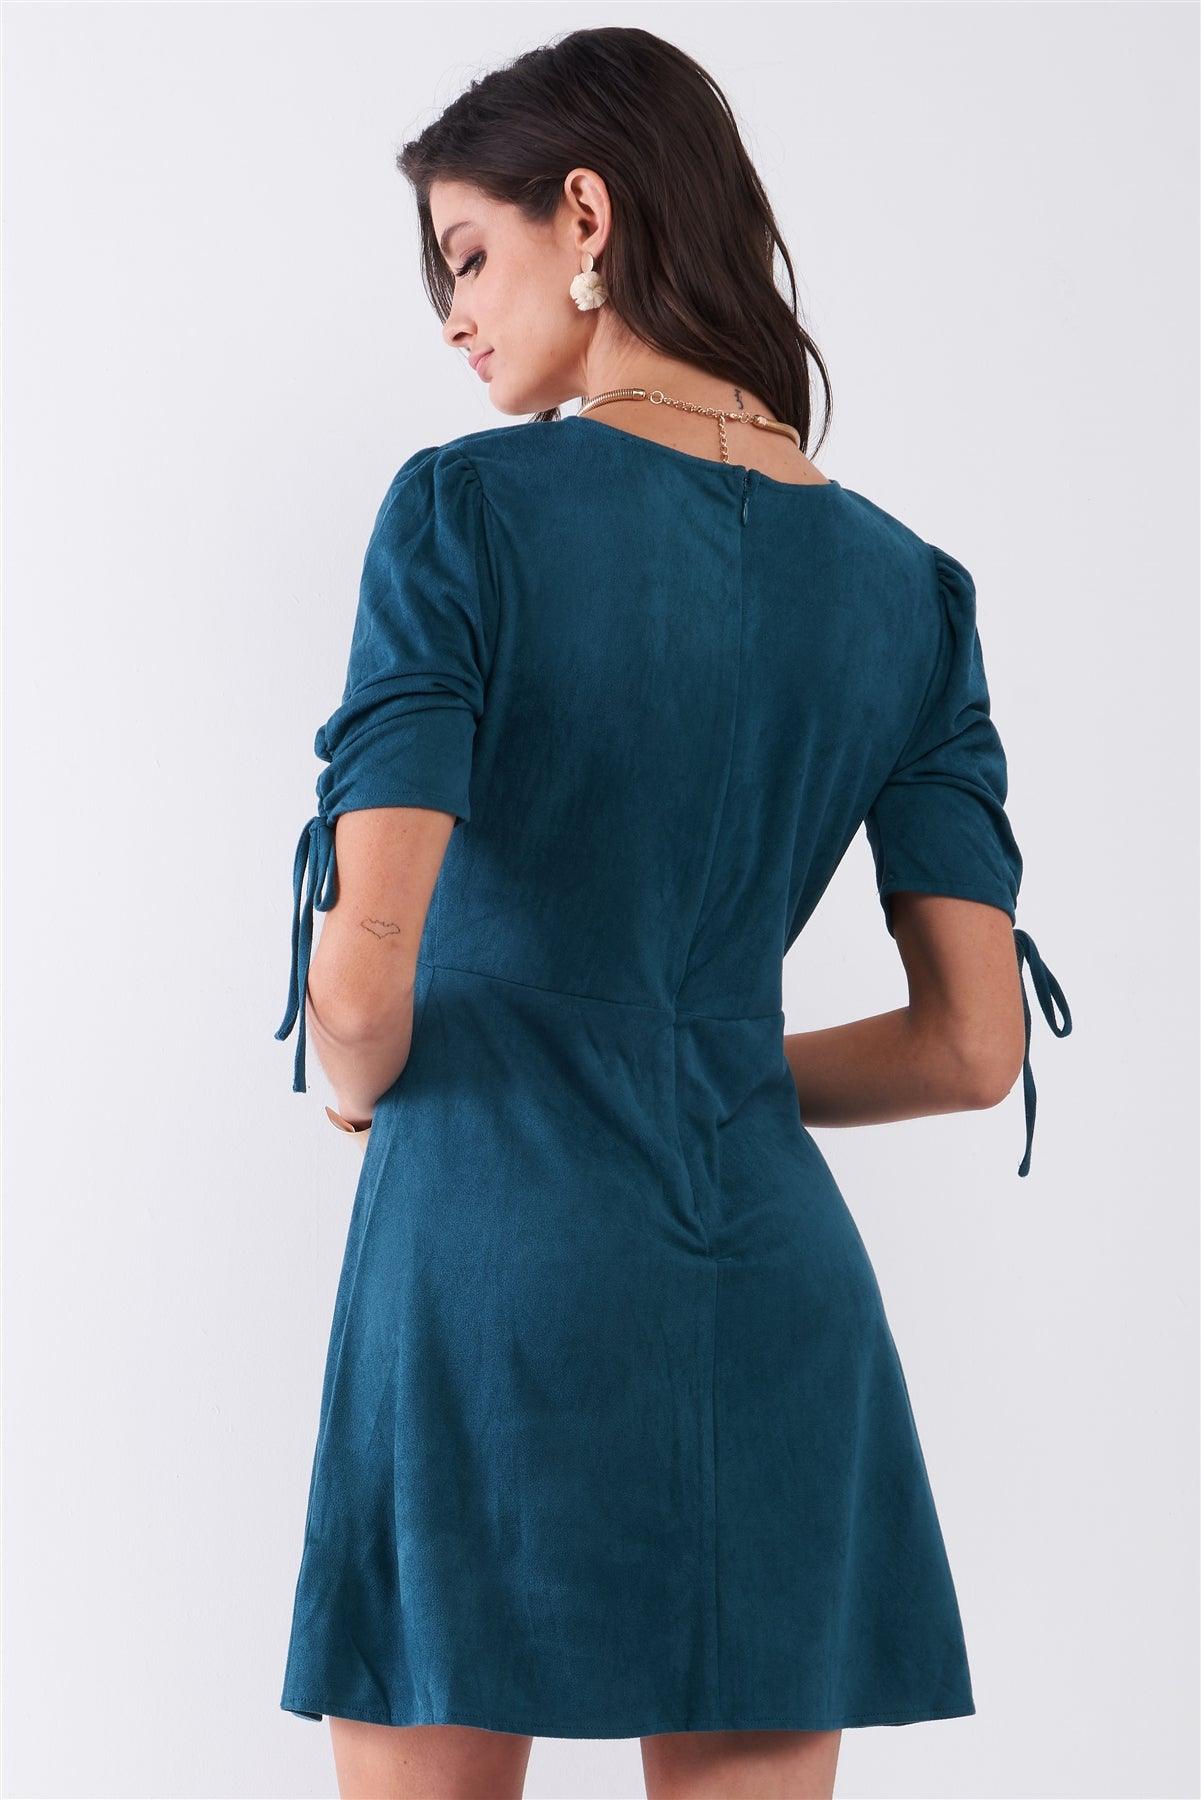 Emerald Green Suede Deep Plunge V-Neck Gathered Detail Tight Fit Mini Dress /1-1-2-1-1